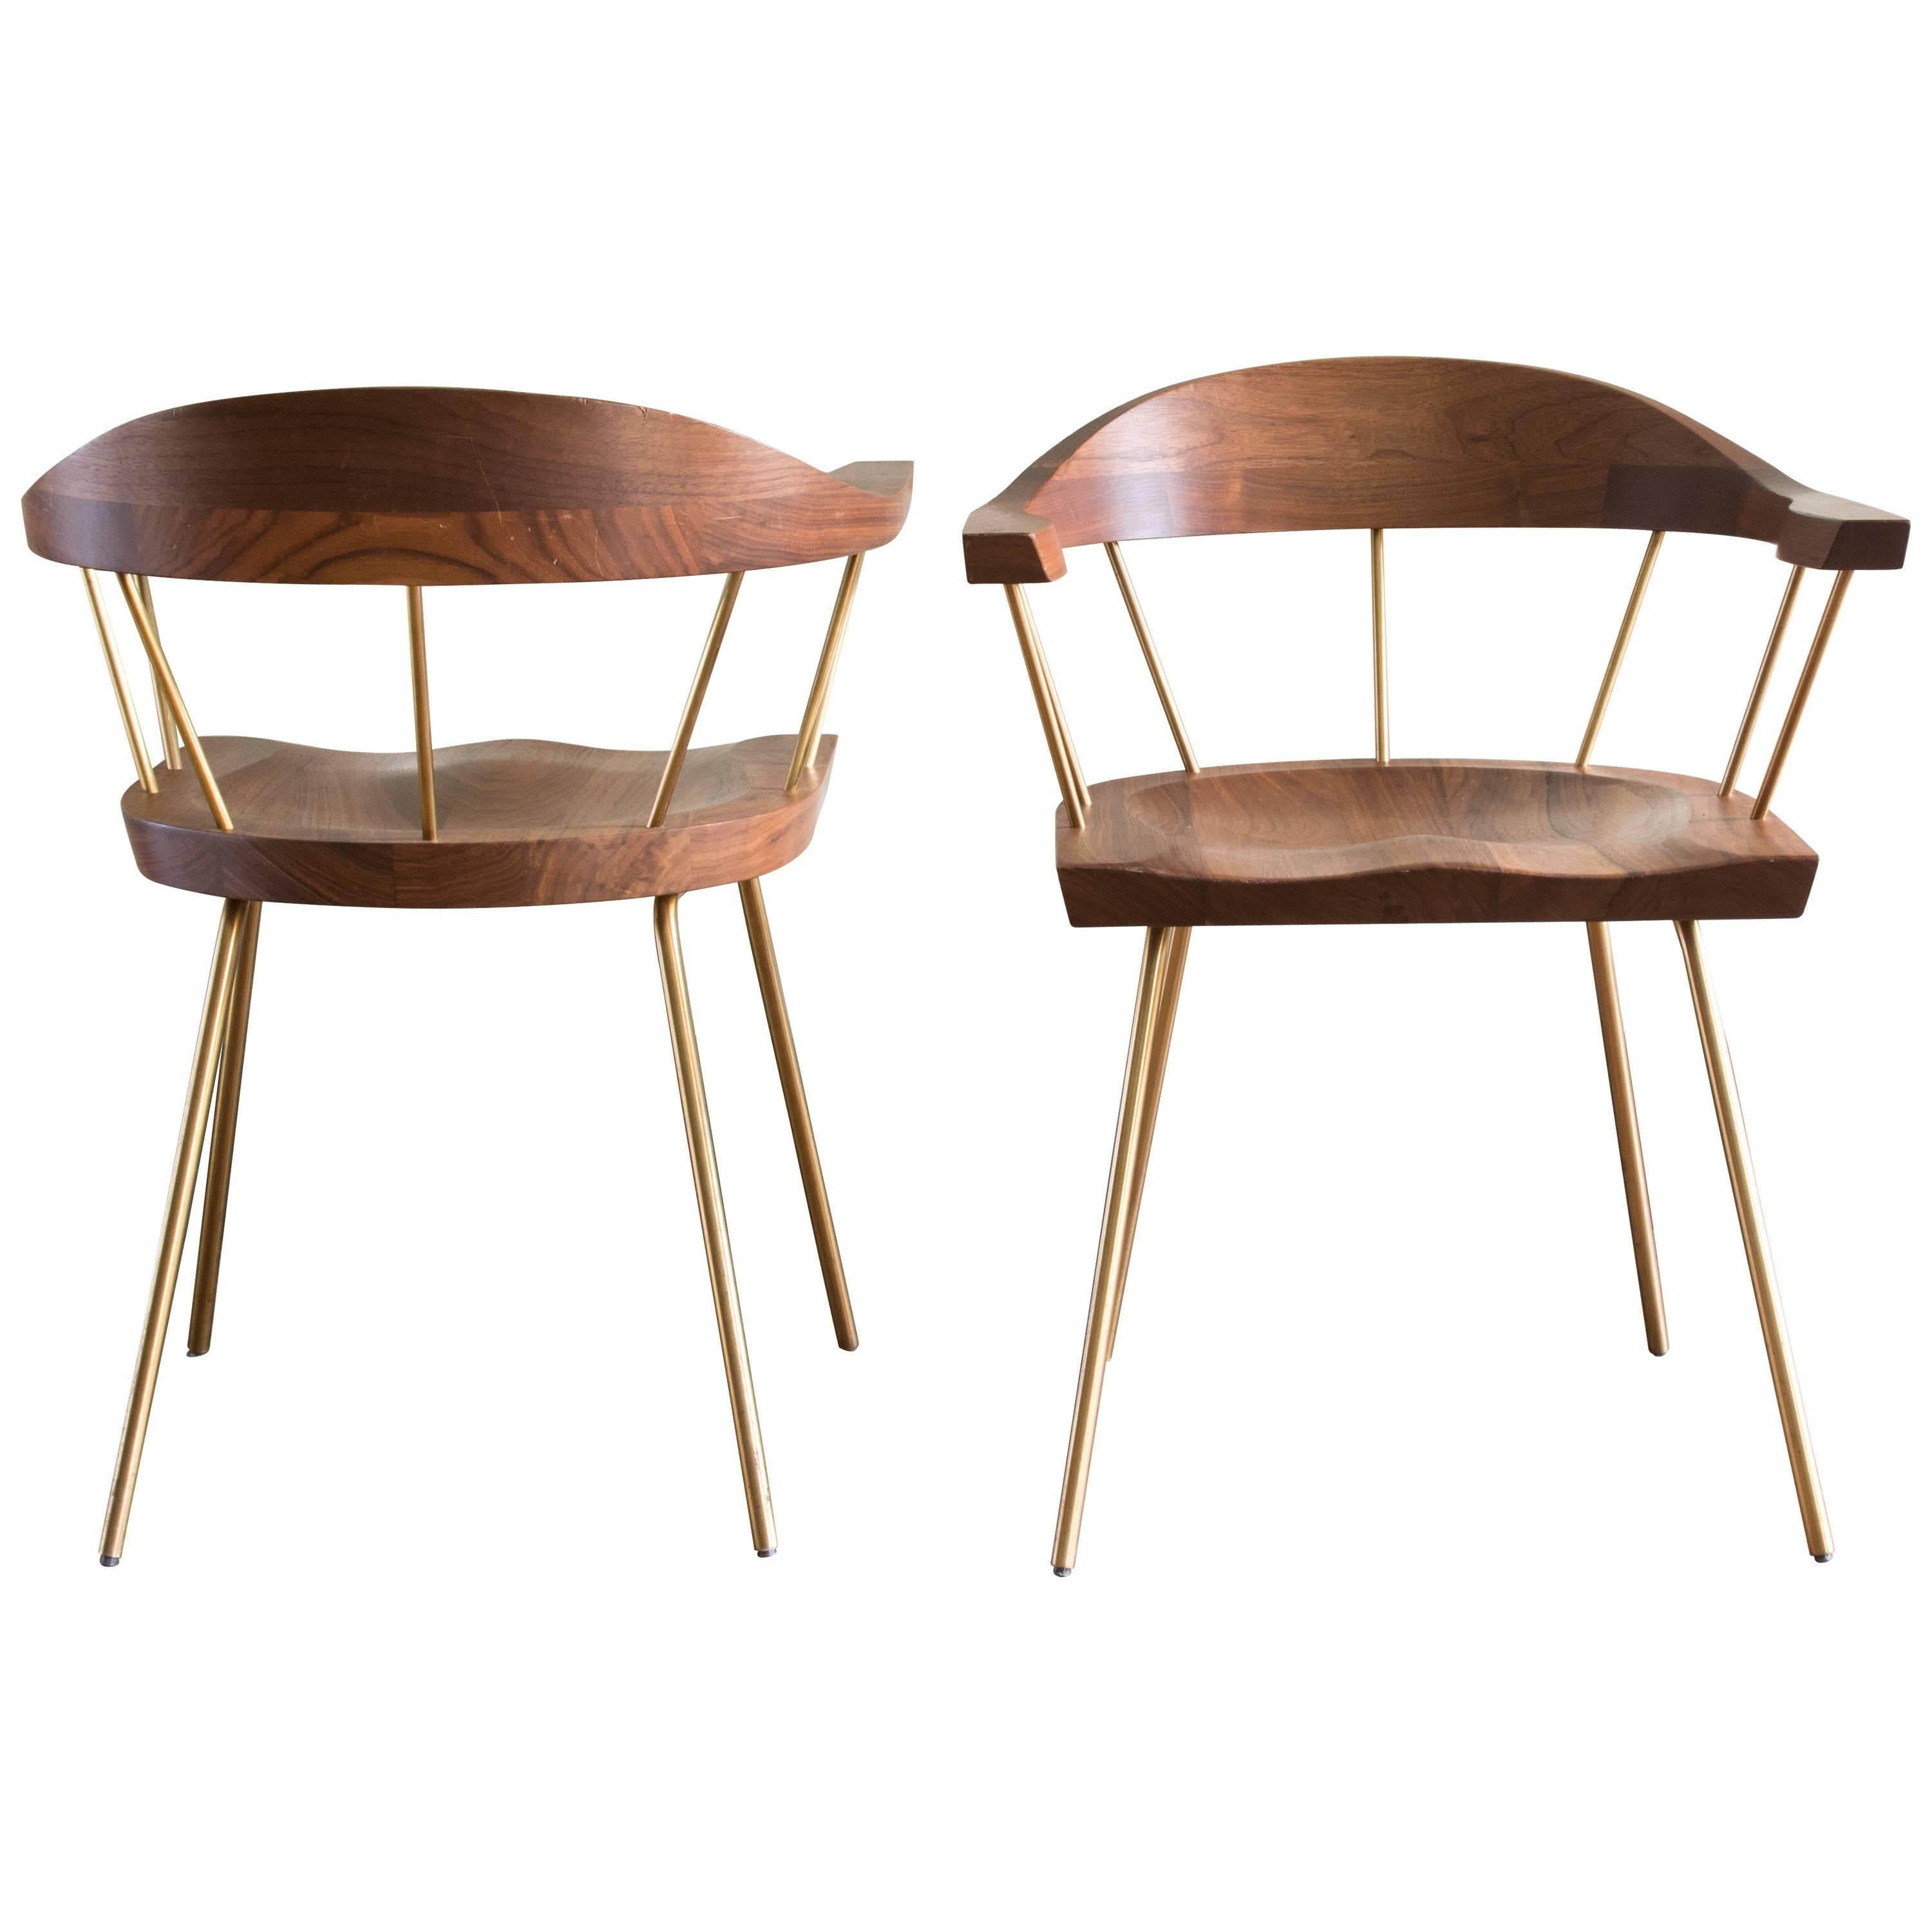 Bassam Fellows 'Spindle' Chairs